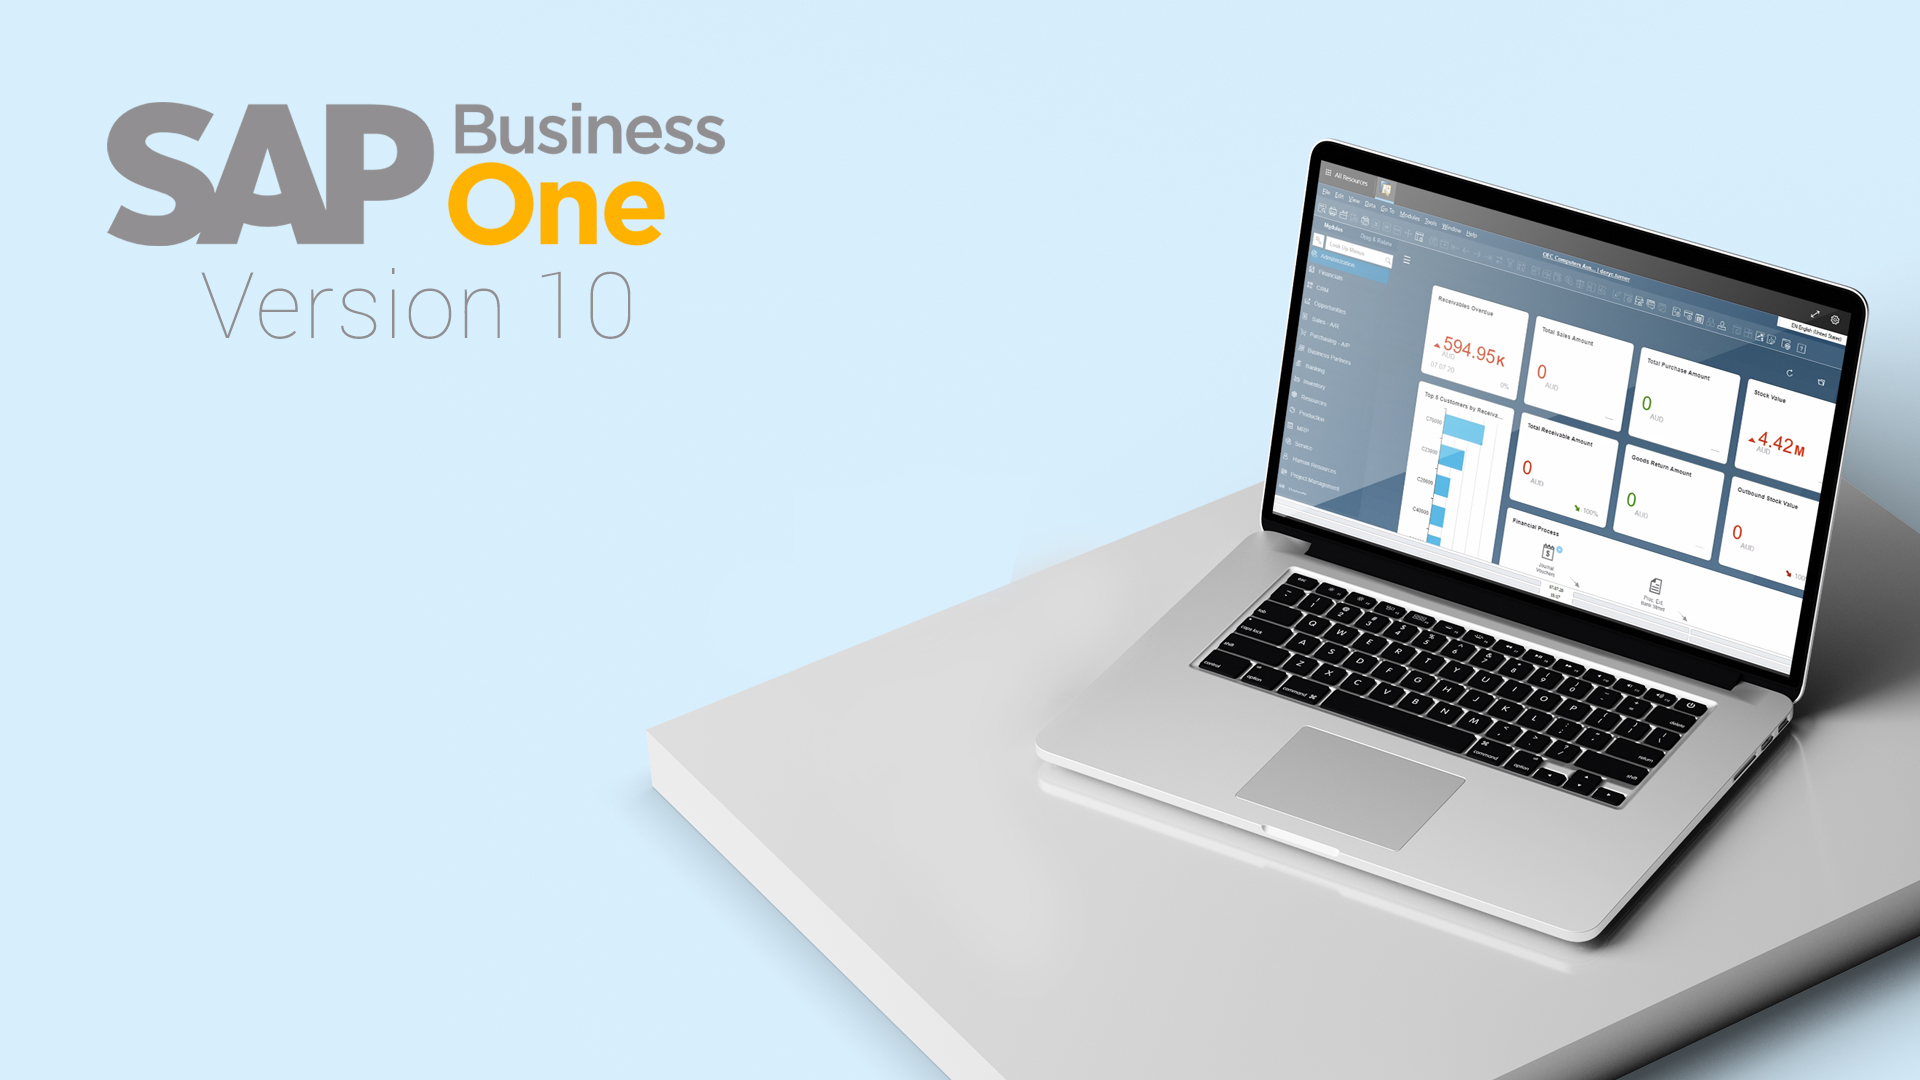 SAP Business One 10.0 Version Features